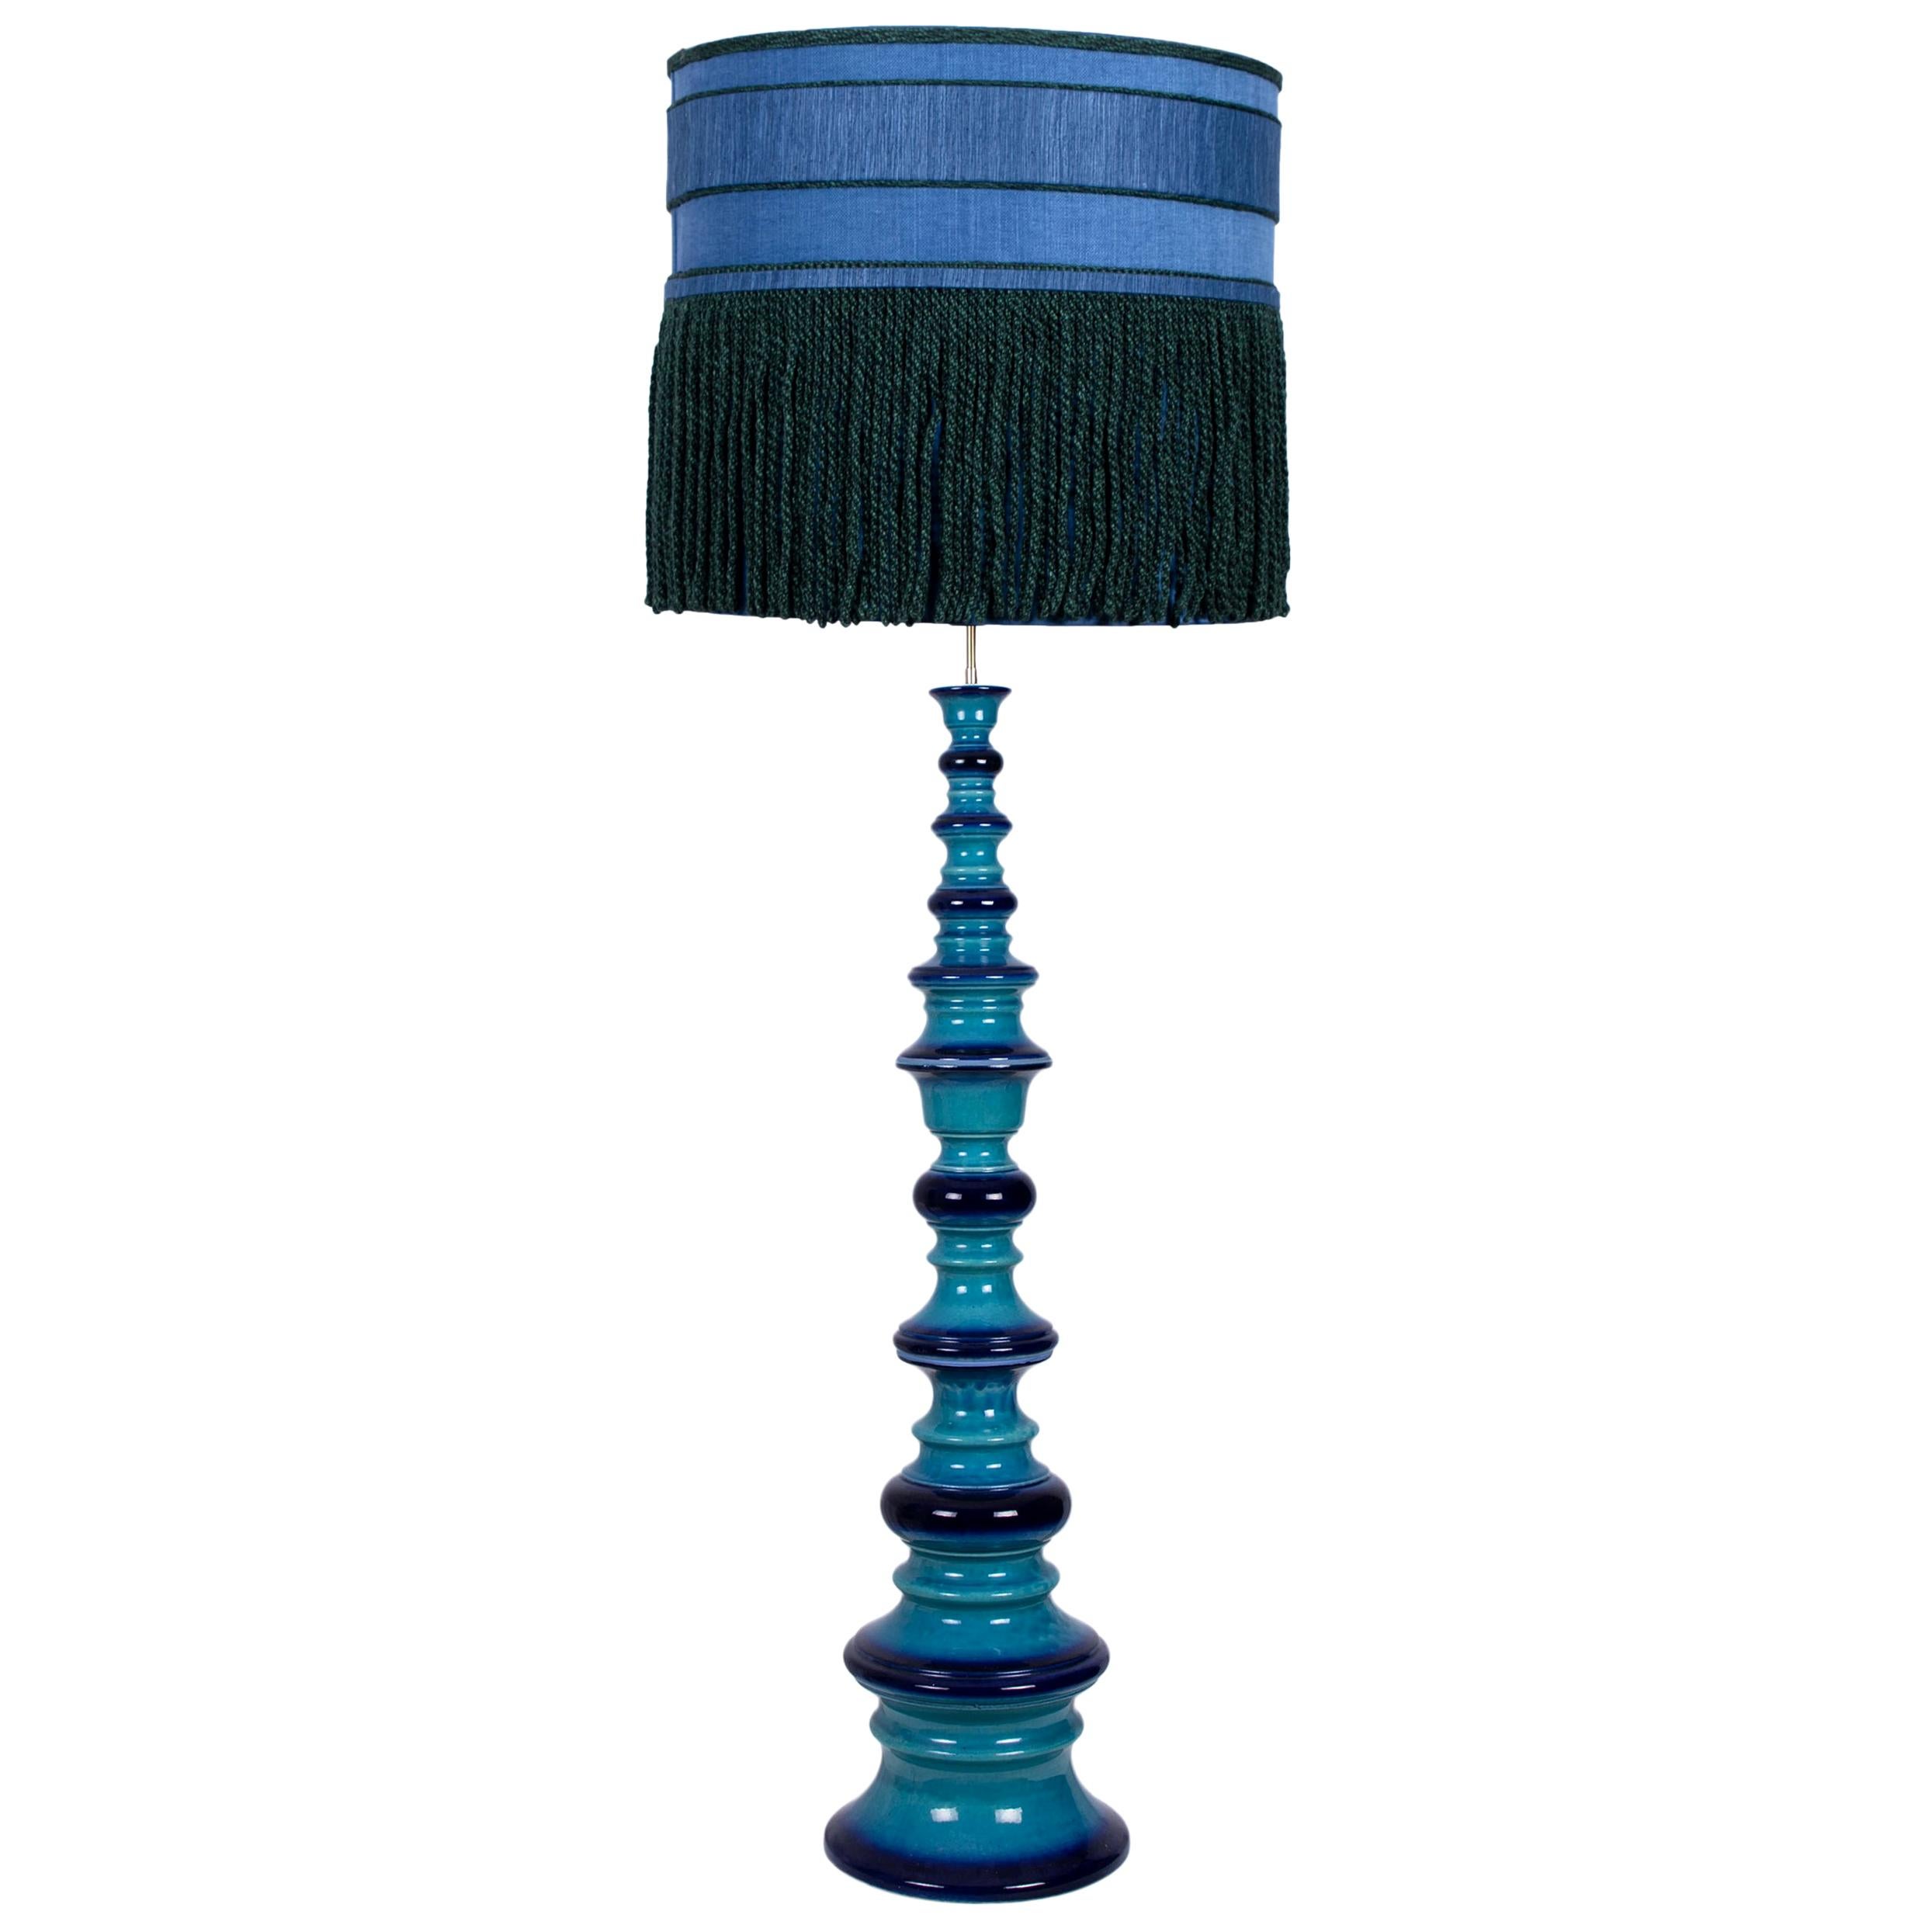 Exceptional large ceramic bubble floor lamp, Germany, 1960s. A sculptural high-end piece made of handmade ceramic in rich glazed blue tones. With a new custom made blue silk lamp shade by René Houben. With Fringes from Houles Paris and a warm